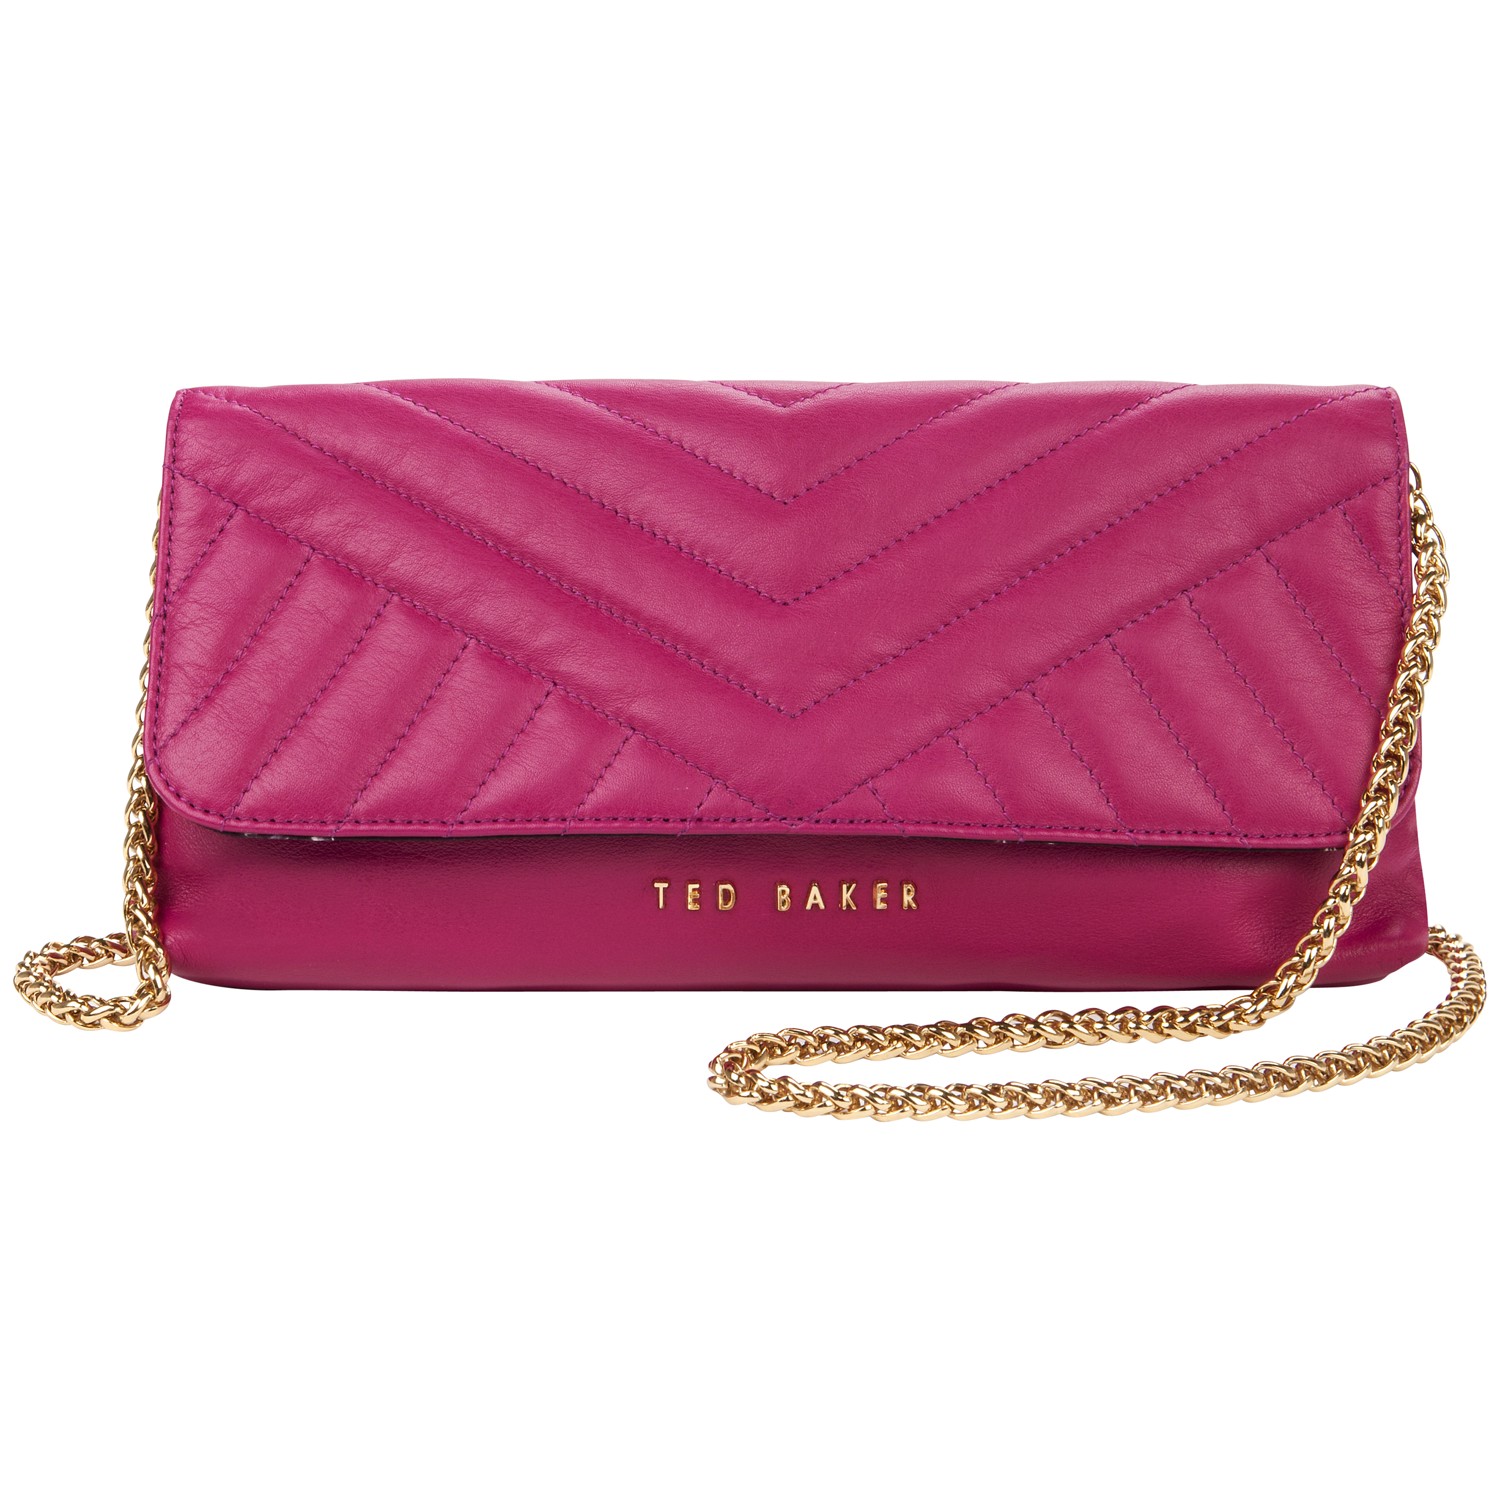 Ted Baker Talton Quilted Leather Clutch Handbag in Pink | Lyst